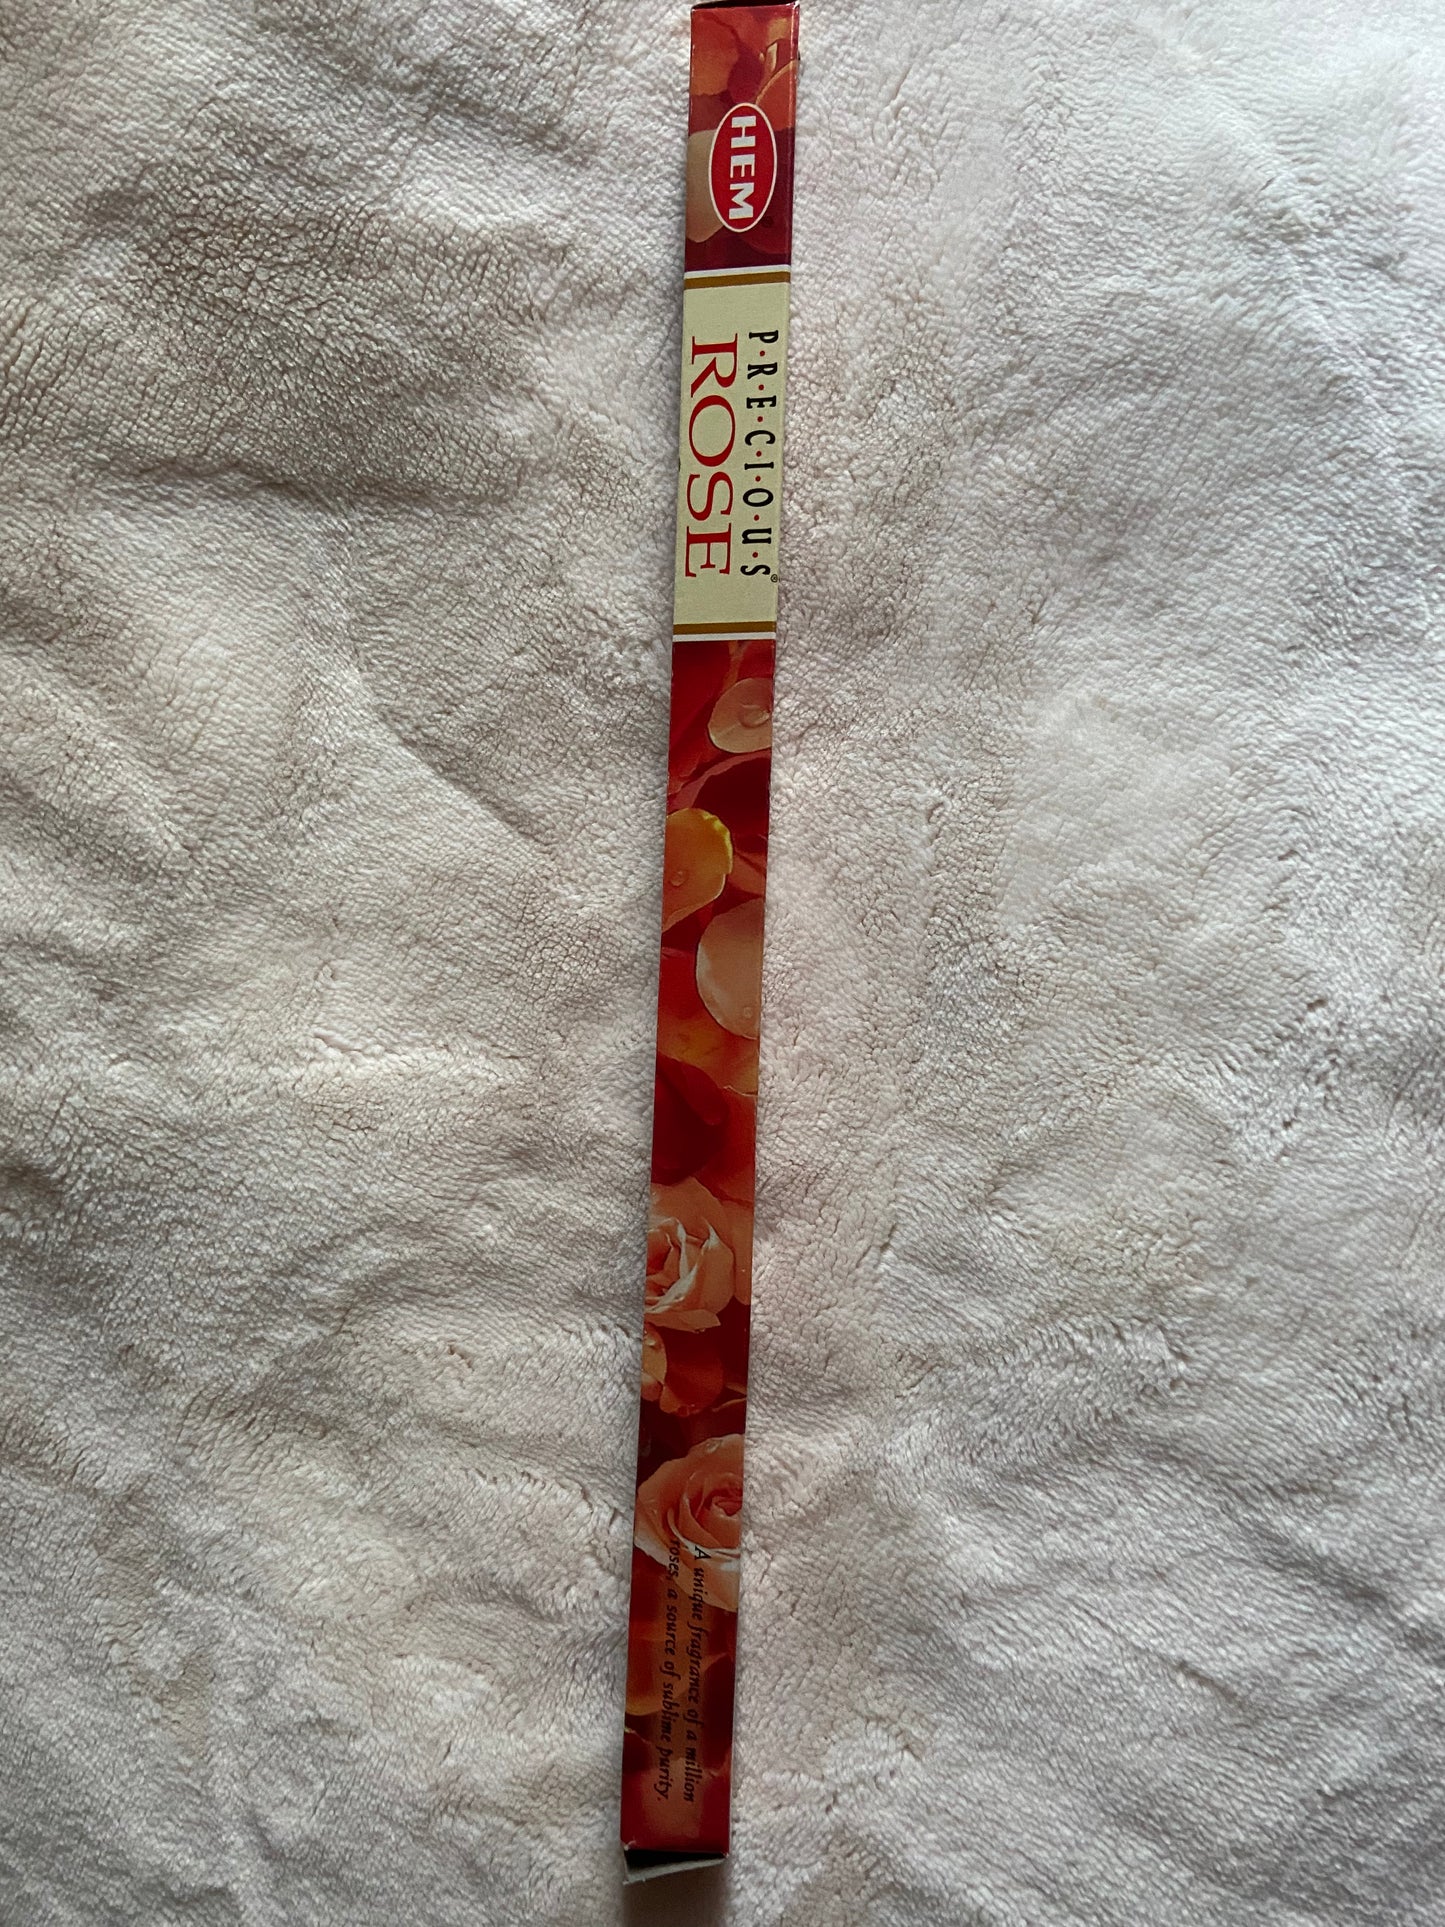  Rose Incense Stick -  available at Amazing Creations Products . Grab yours for $1.99 today!